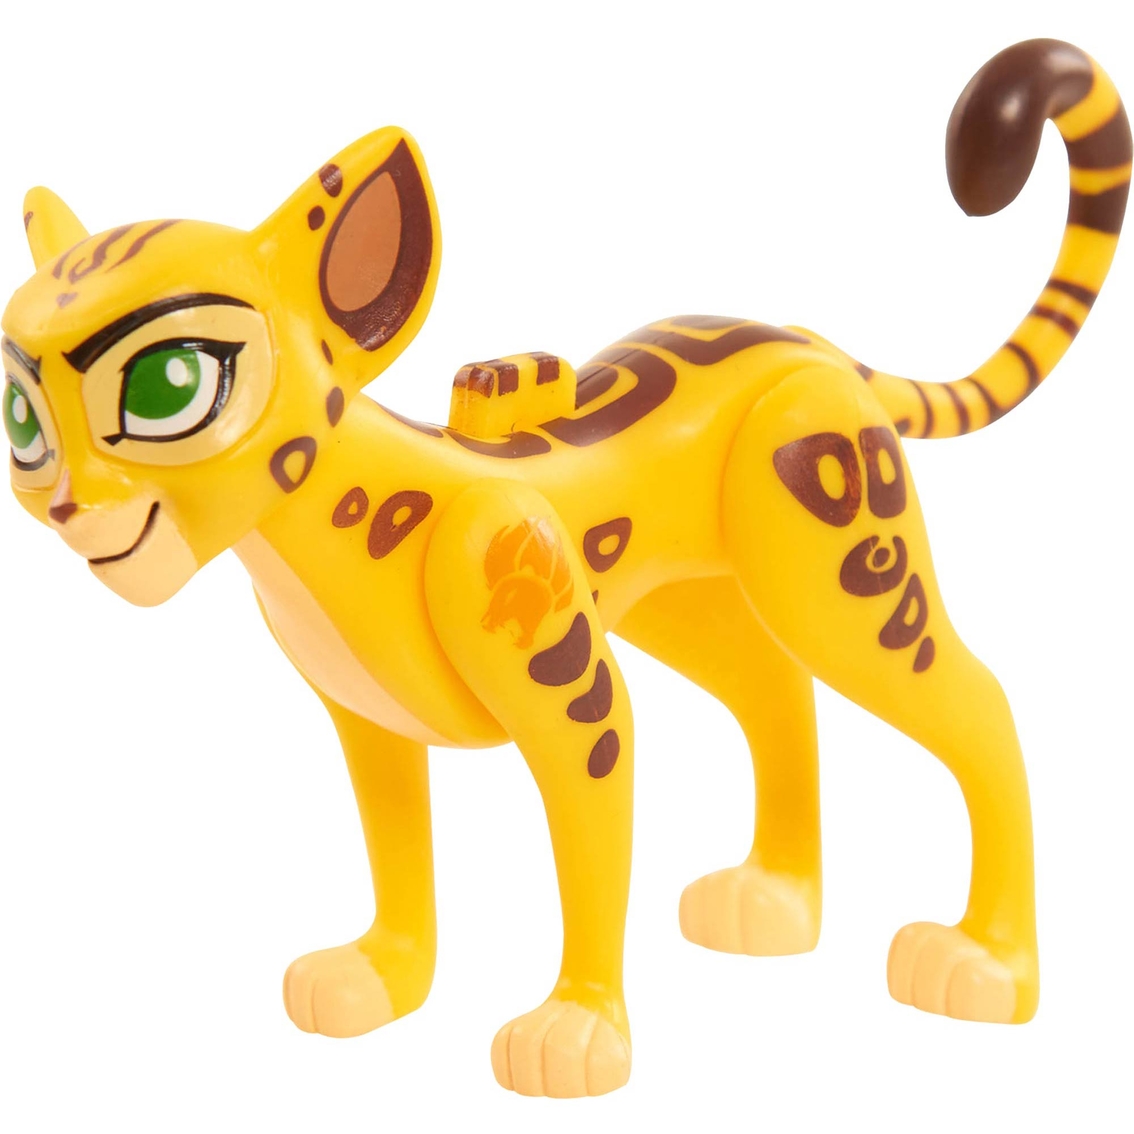 Disney The Lion Guard Collectible 5 Figure Set - Image 6 of 6